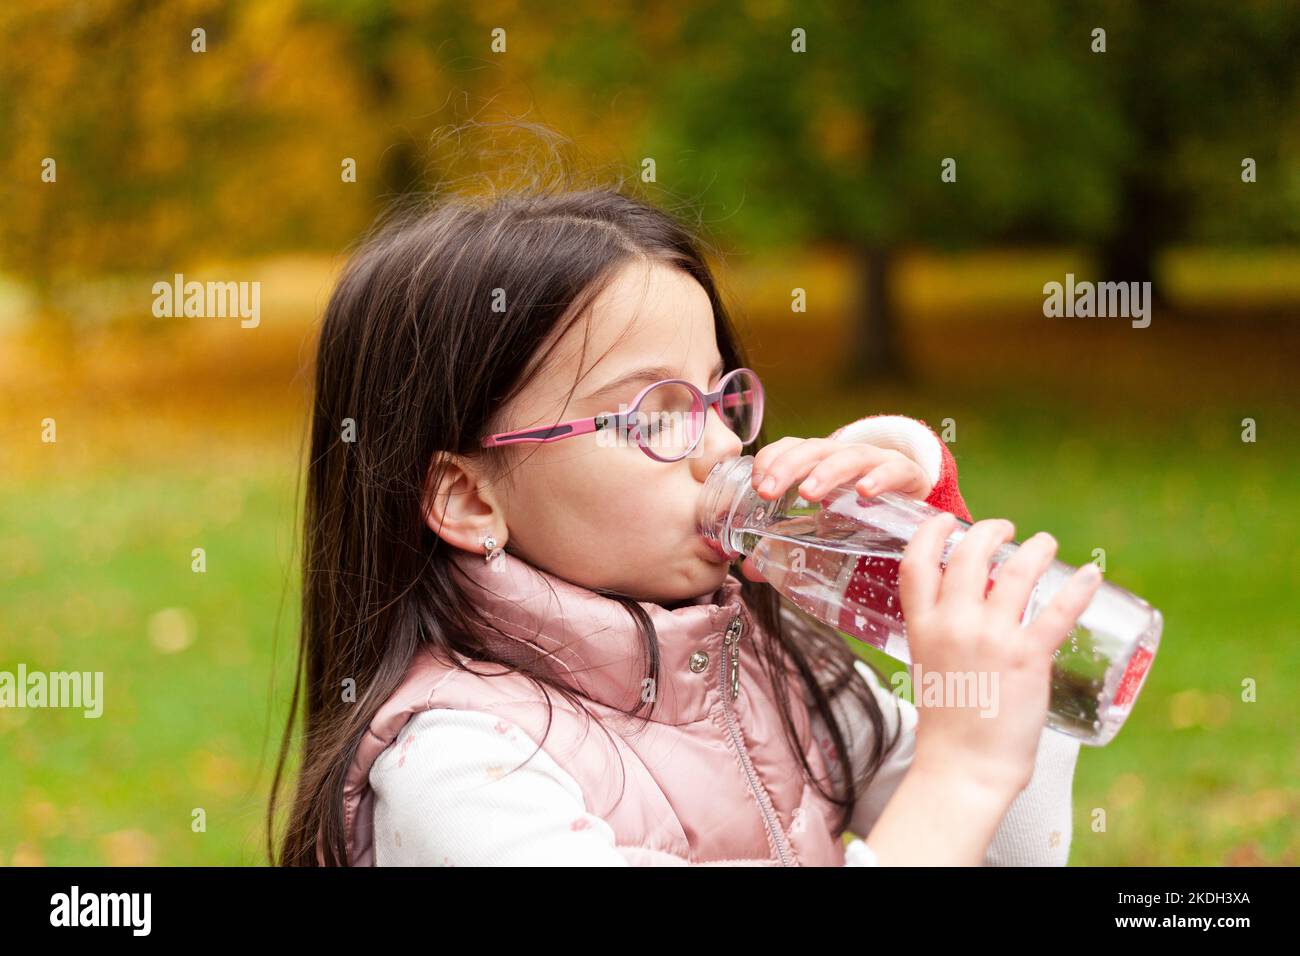 Cute girl with long hair and glasses drinks water from a plastic bottle on a blurred autumn park background Stock Photo